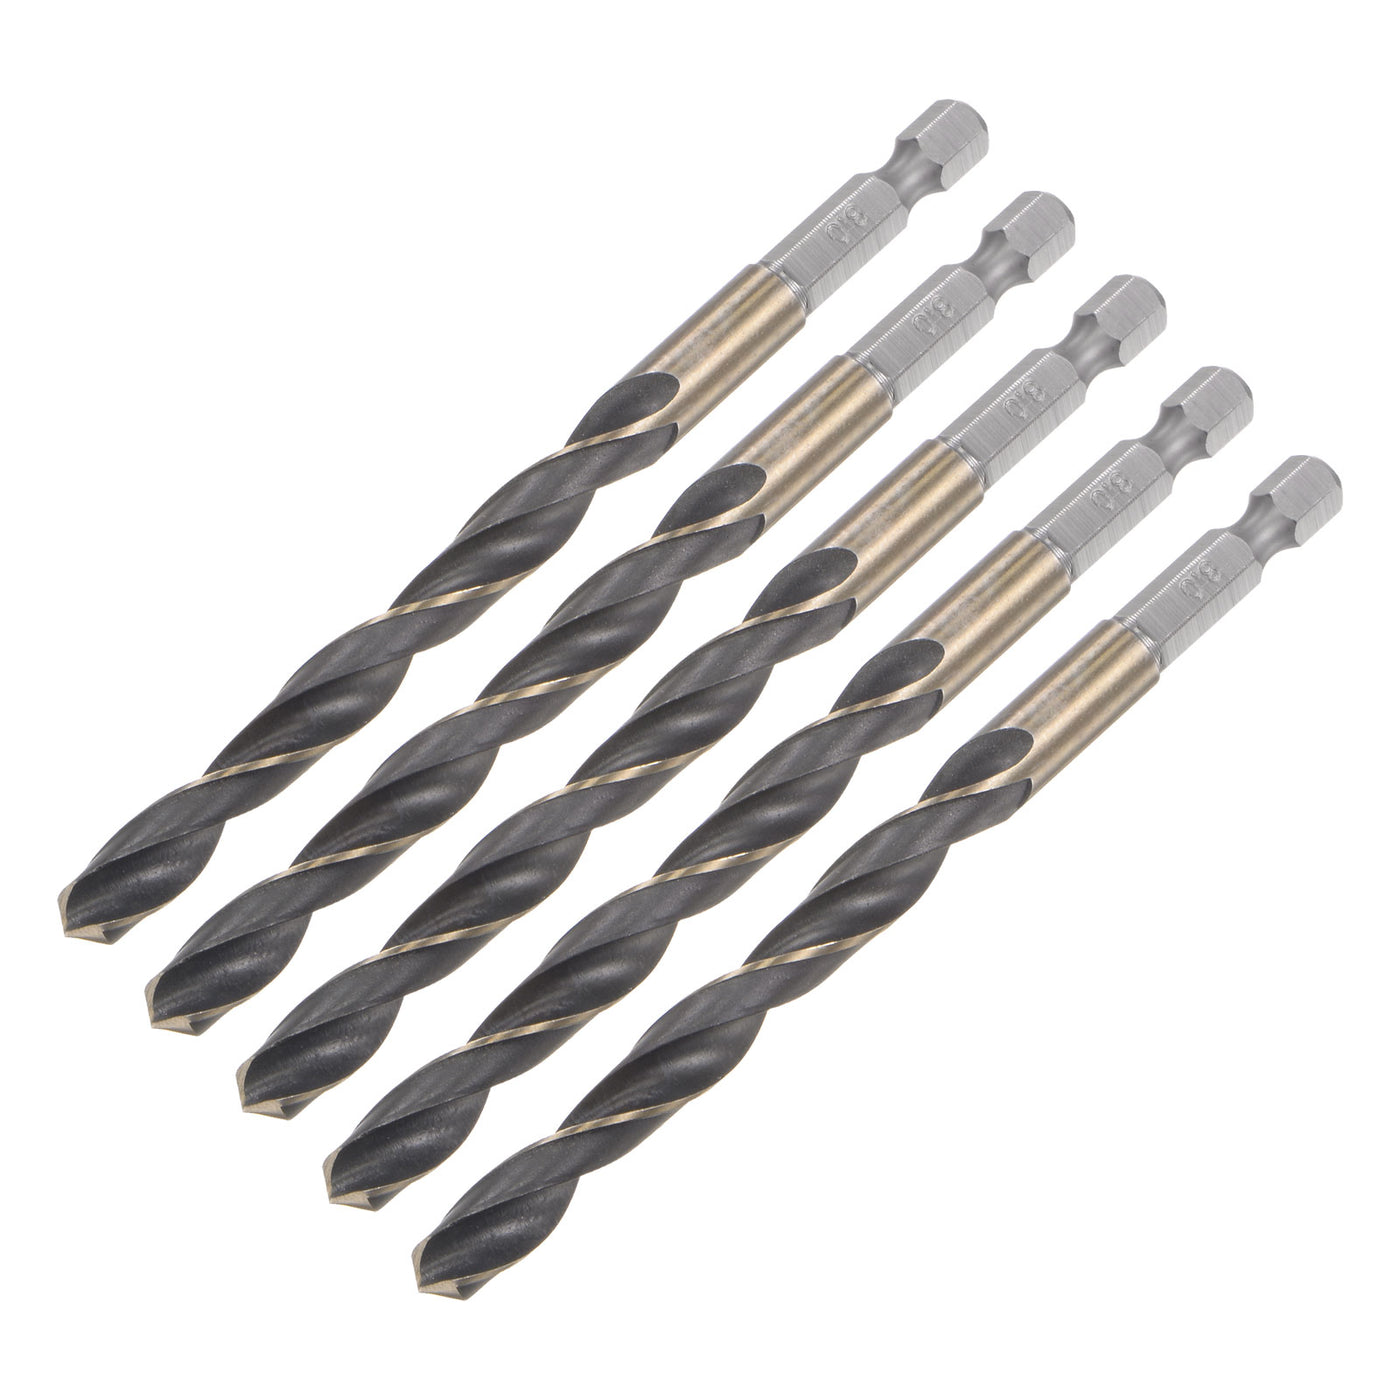 uxcell Uxcell 5Pcs 8mm High Speed Steel Twist Drill Bit with Hex Shank 116mm Length